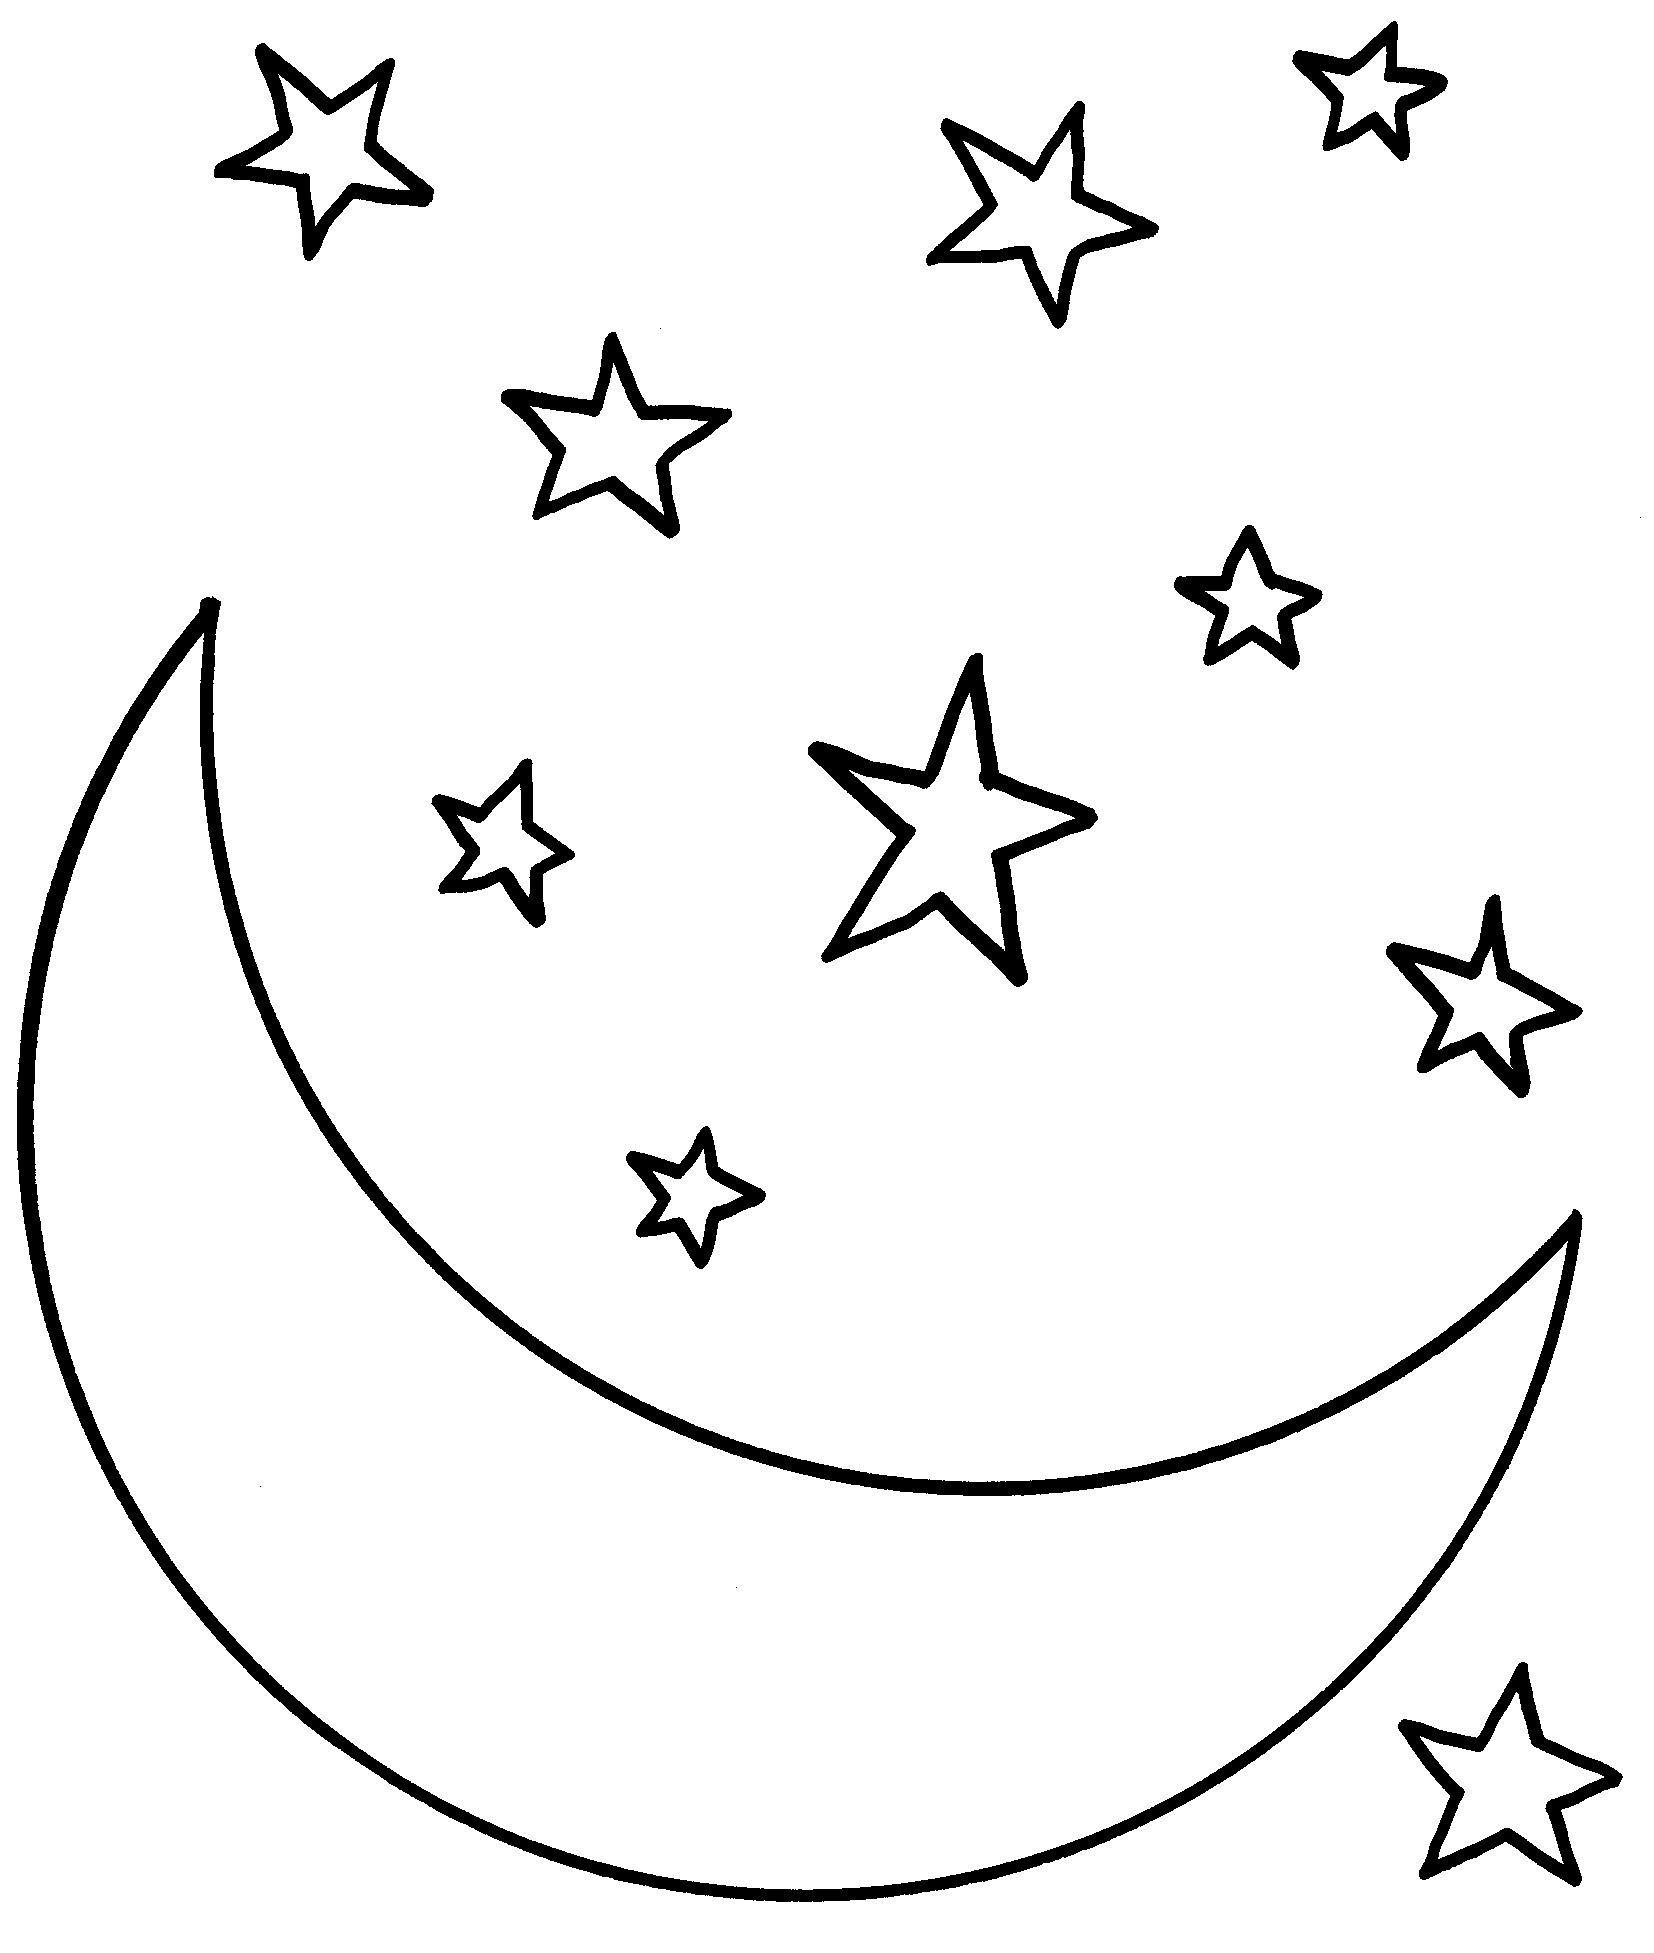 Moon Coloring - Coloring Pages for Kids and for Adults